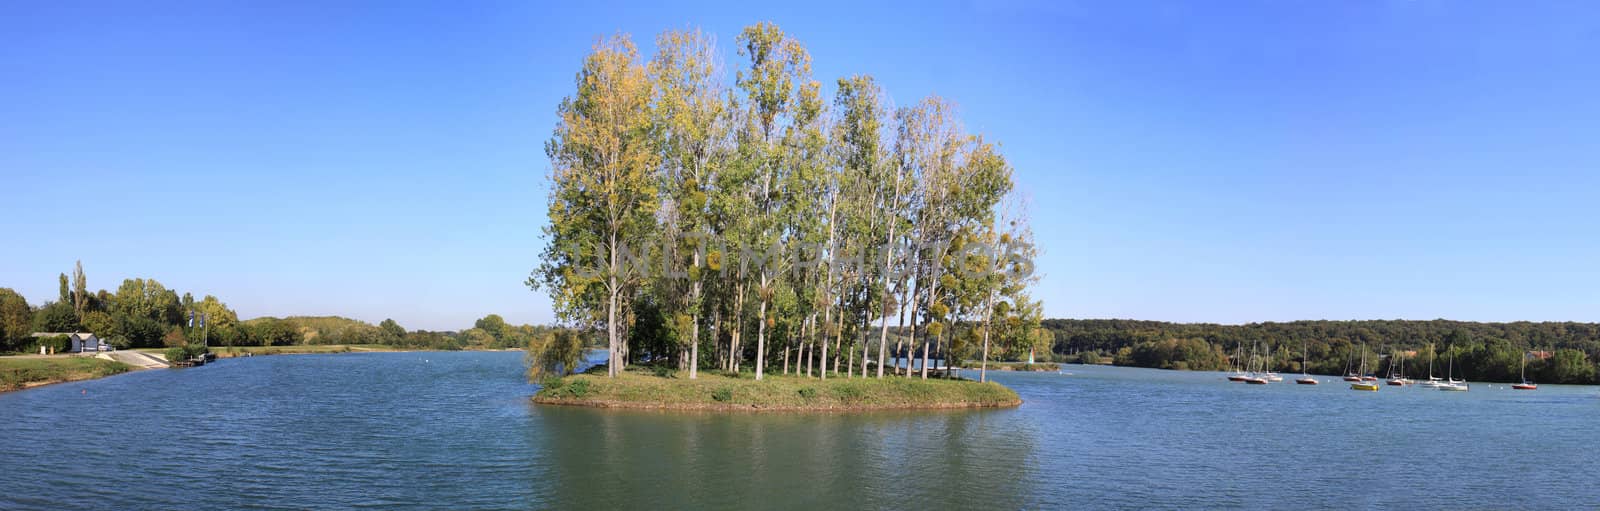 panoramic photo of the lake with its island and marina Cepoy